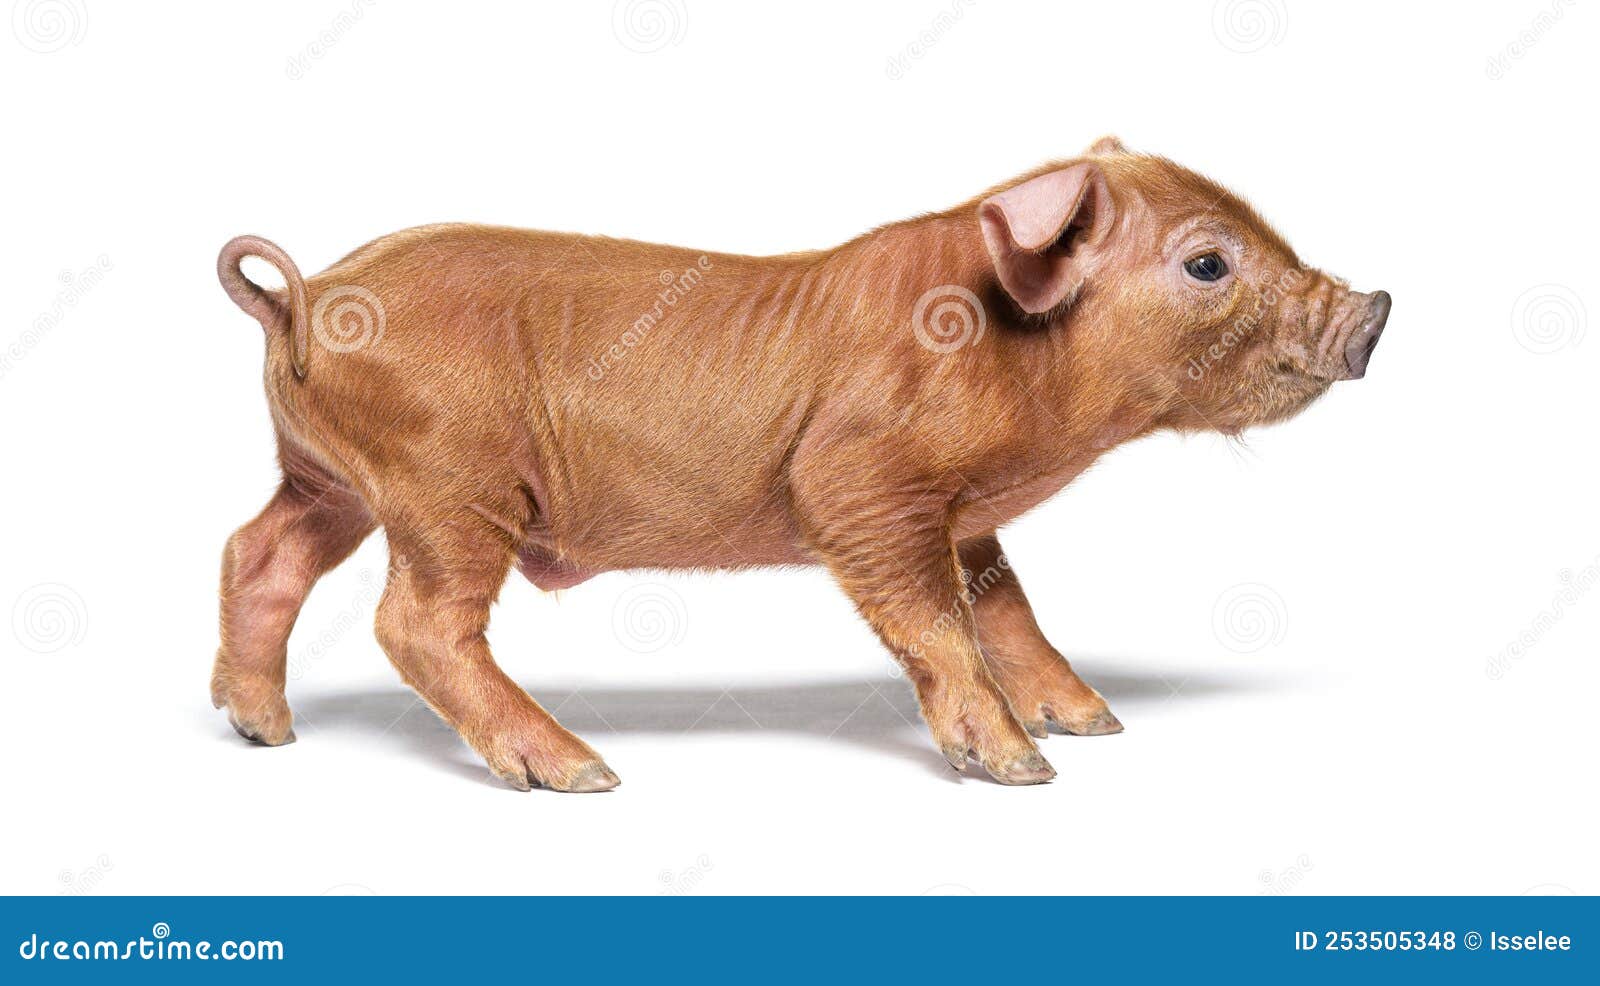 profile of a young pig mixedbreed, 